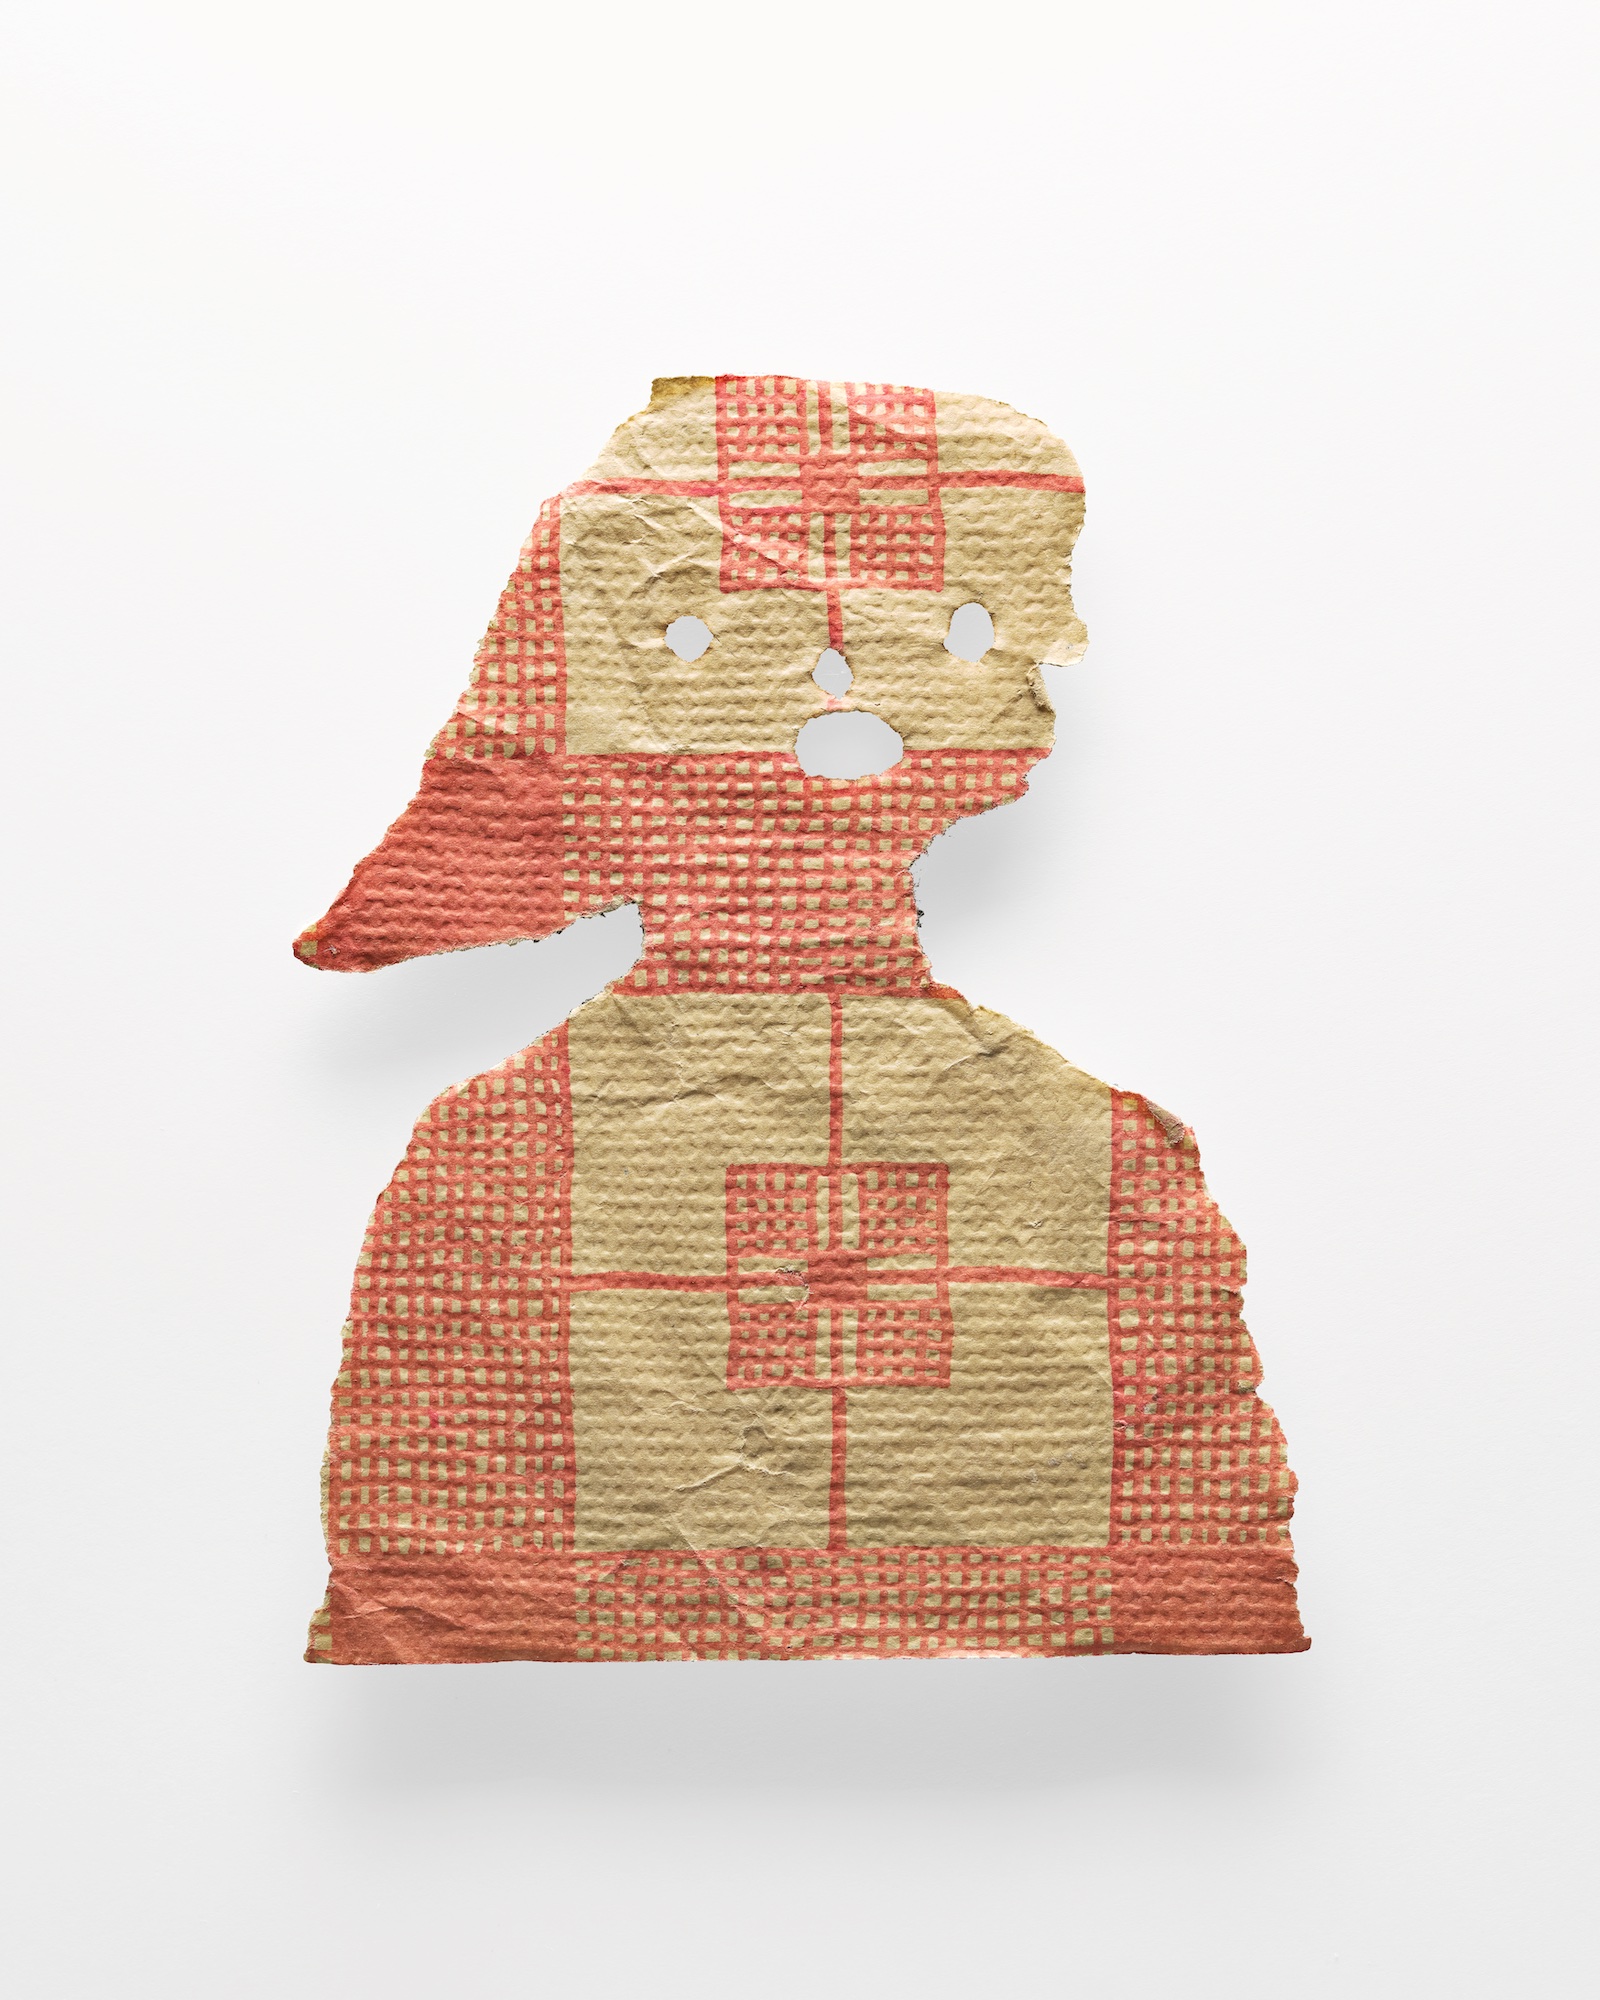 A cutout of a girl's head and face on red and yellow tablecloth material